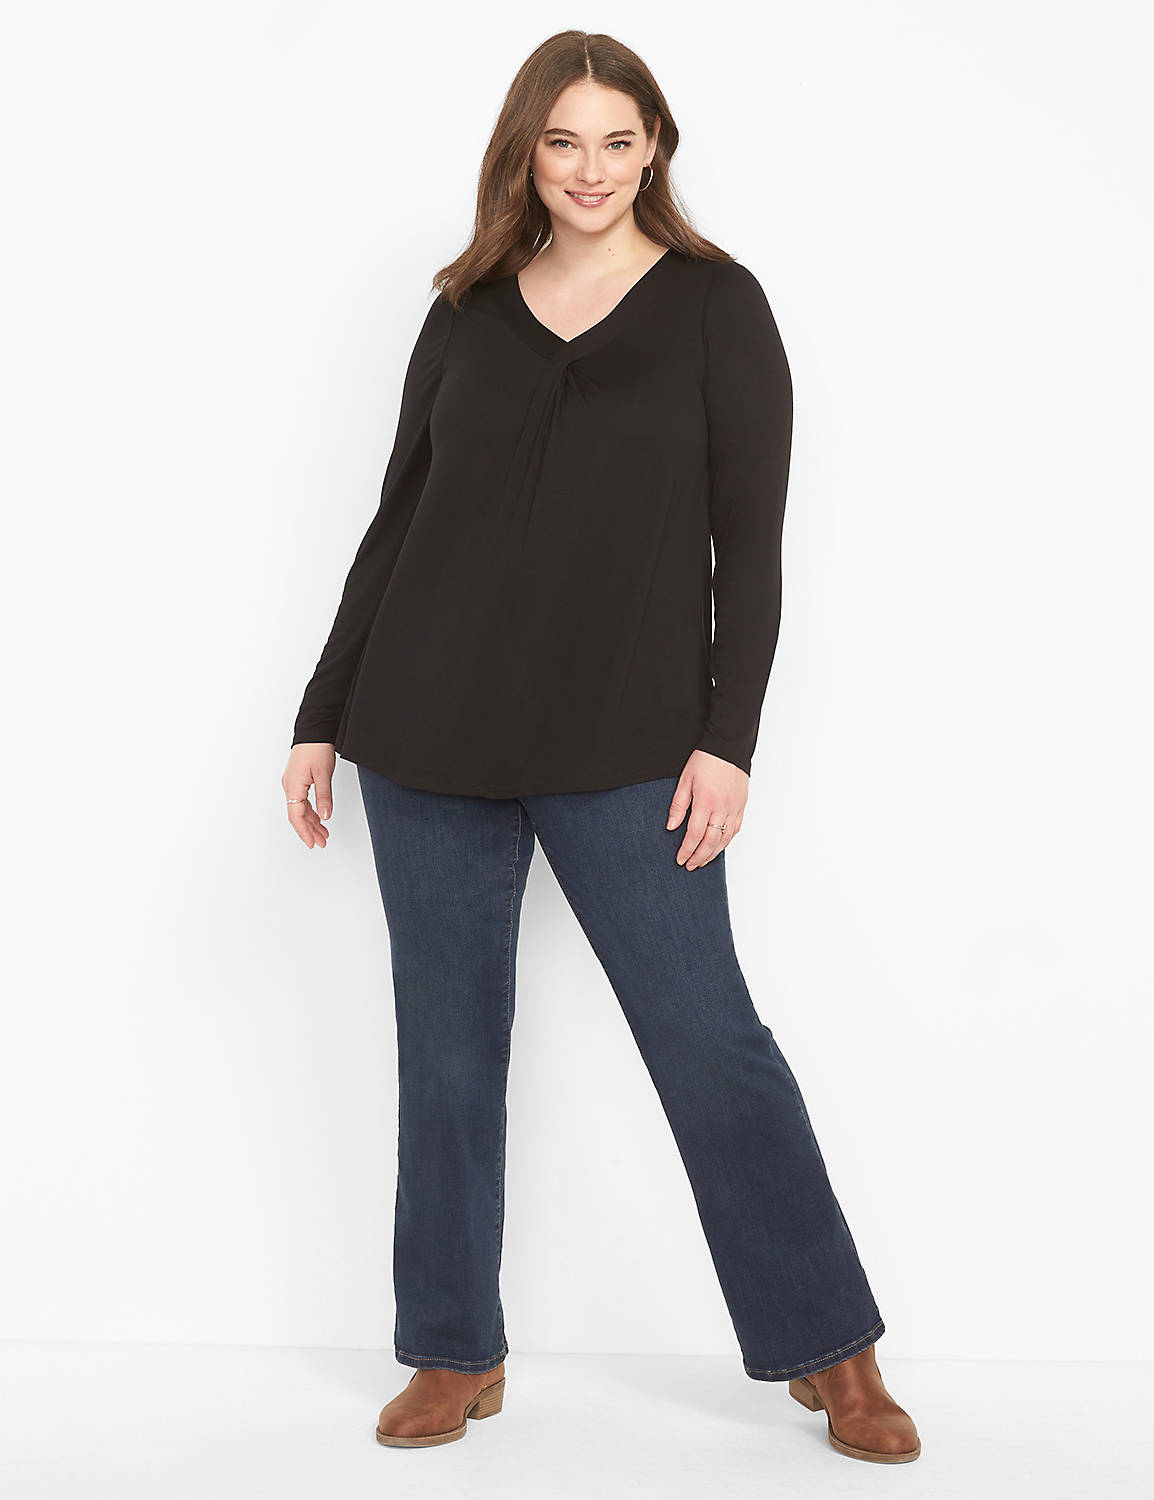 Long Sleeve Perfect Sleeve Wrap Front Swing Tee 1127632:Ascena Black:10/12 Product Image 3